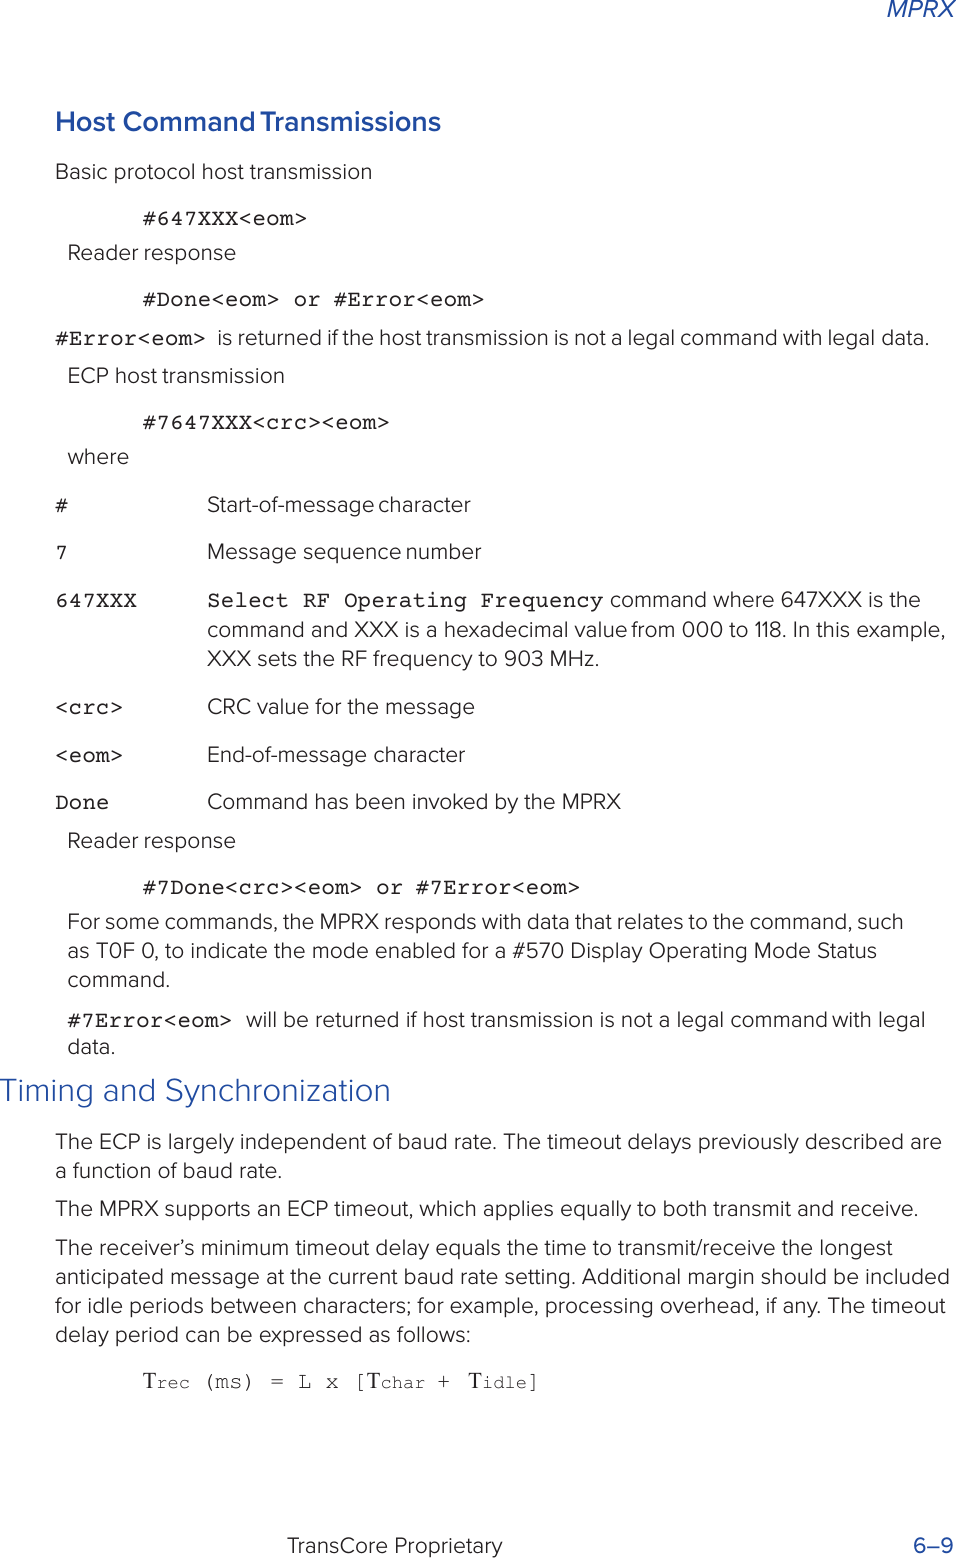 MPRXTransCore Proprietary 6–9Host  Command TransmissionsBasic protocol host transmission#647XXX&lt;eom&gt;Reader response#Done&lt;eom&gt; or #Error&lt;eom&gt;#Error&lt;eom&gt; is returned if the host transmission is not a legal command with legal data.ECP host transmission#7647XXX&lt;crc&gt;&lt;eom&gt;where# Start-of-message character7 Message sequence number647XXX  Select RF Operating Frequency command where 647XXX is the command and XXX is a hexadecimal value from 000 to 118. In this example, XXX sets the RF frequency to 903 MHz.&lt;crc&gt;  CRC value for the message&lt;eom&gt;  End-of-message characterDone  Command has been invoked by the MPRXReader response#7Done&lt;crc&gt;&lt;eom&gt; or #7Error&lt;eom&gt;For some commands, the MPRX responds with data that relates to the command, such as T0F 0, to indicate the mode enabled for a #570 Display Operating Mode Status command.#7Error&lt;eom&gt; will be returned if host transmission is not a legal command with legal data.Timing and SynchronizationThe ECP is largely independent of baud rate. The timeout delays previously described are a function of baud rate.The MPRX supports an ECP timeout, which applies equally to both transmit and receive.The receiver’s minimum timeout delay equals the time to transmit/receive the longest anticipated message at the current baud rate setting. Additional margin should be included for idle periods between characters; for example, processing overhead, if any. The timeout delay period can be expressed as follows:Τrec (ms) = L x [Τchar +  Τidle]